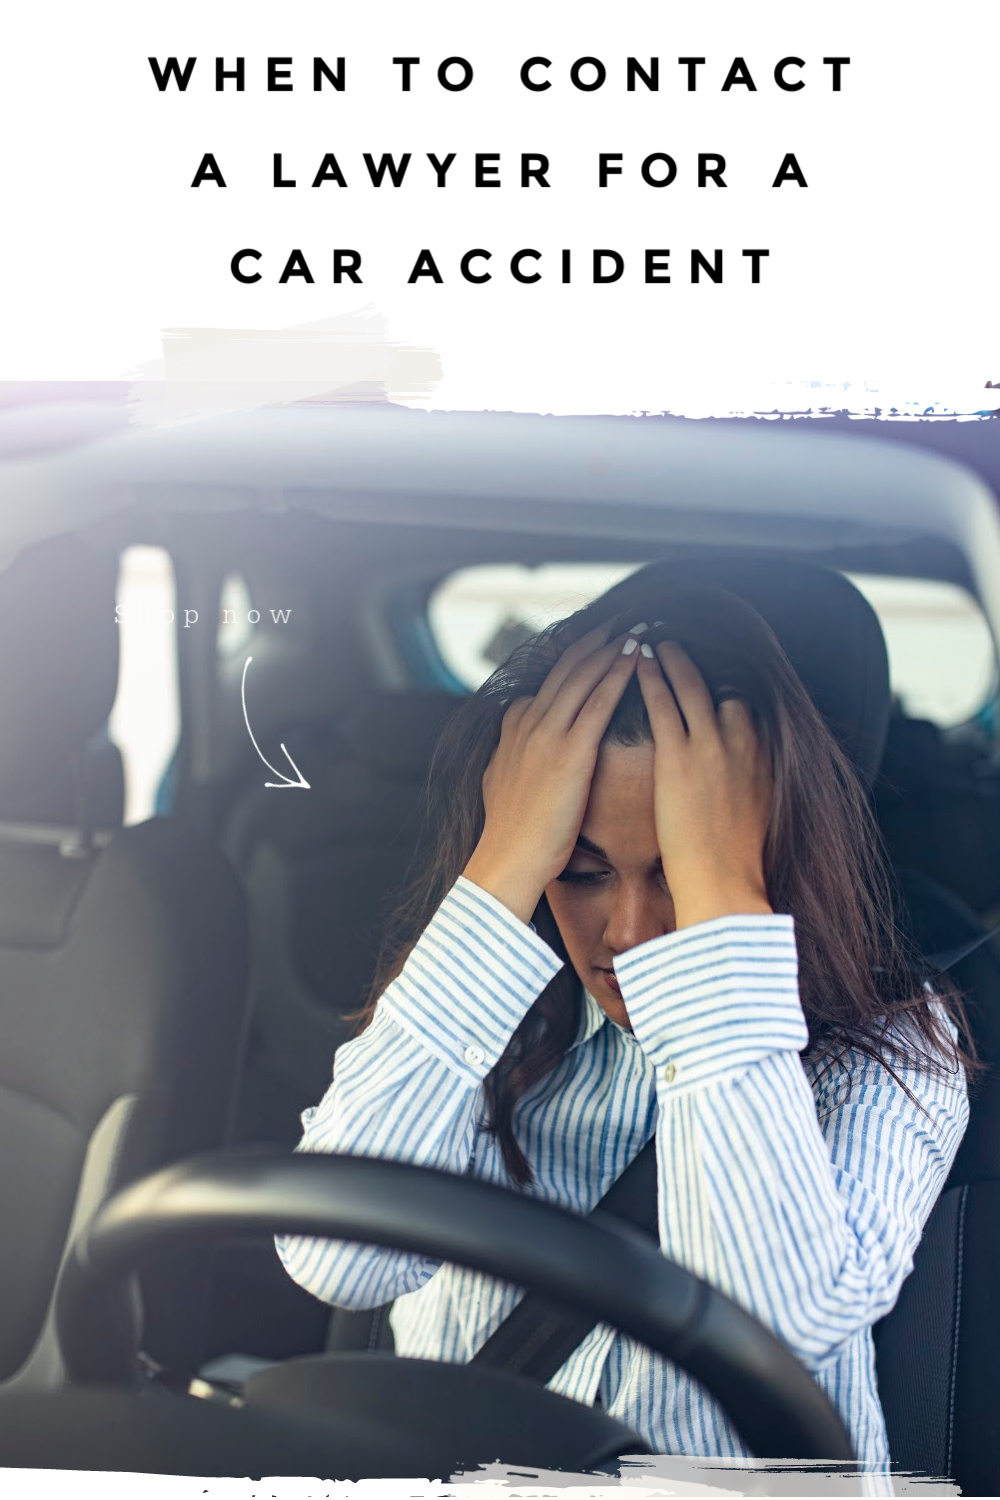 Lawyer for Car Accident Advice